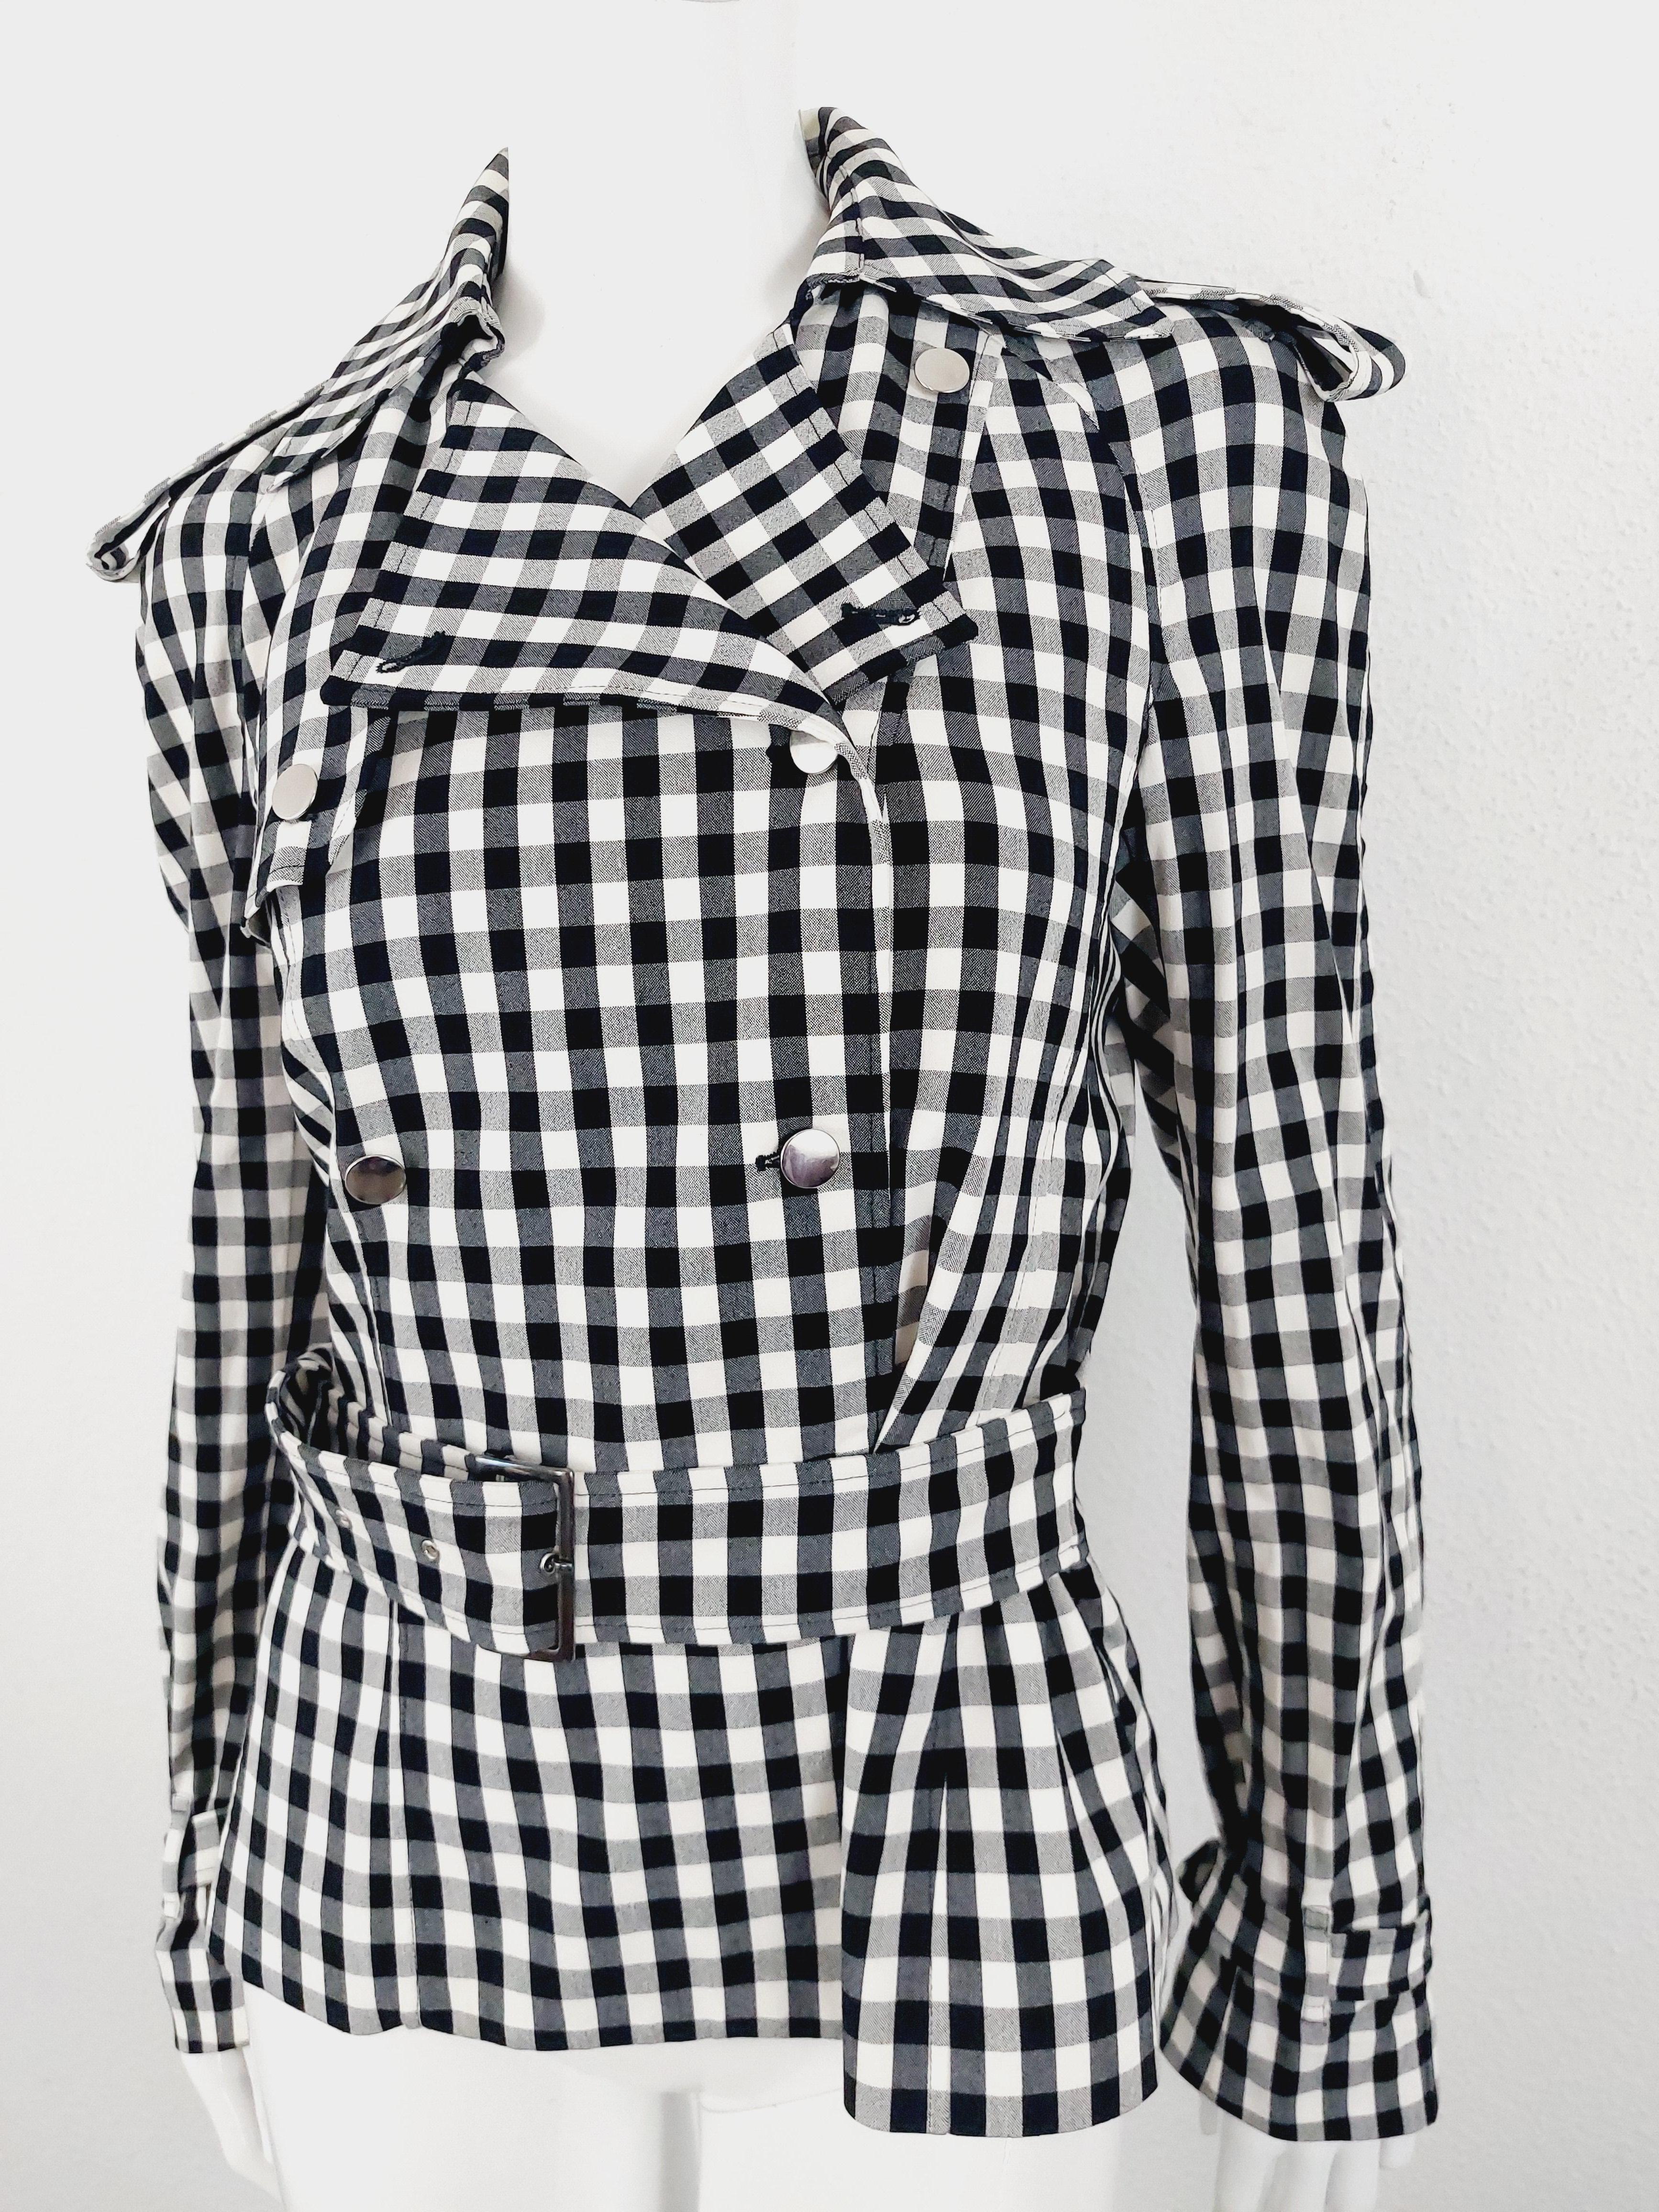 John Galliano Paris Checkered Vintage Y2K Button Up Blazer Jacket

Rage vintage Piece from John Galliano!
It has several butons, you can wear in different ways!
Excellent condition.

Fits S/M.
Fr 42, GB 14, D 40, USA 8

Measurements:
Armpit to